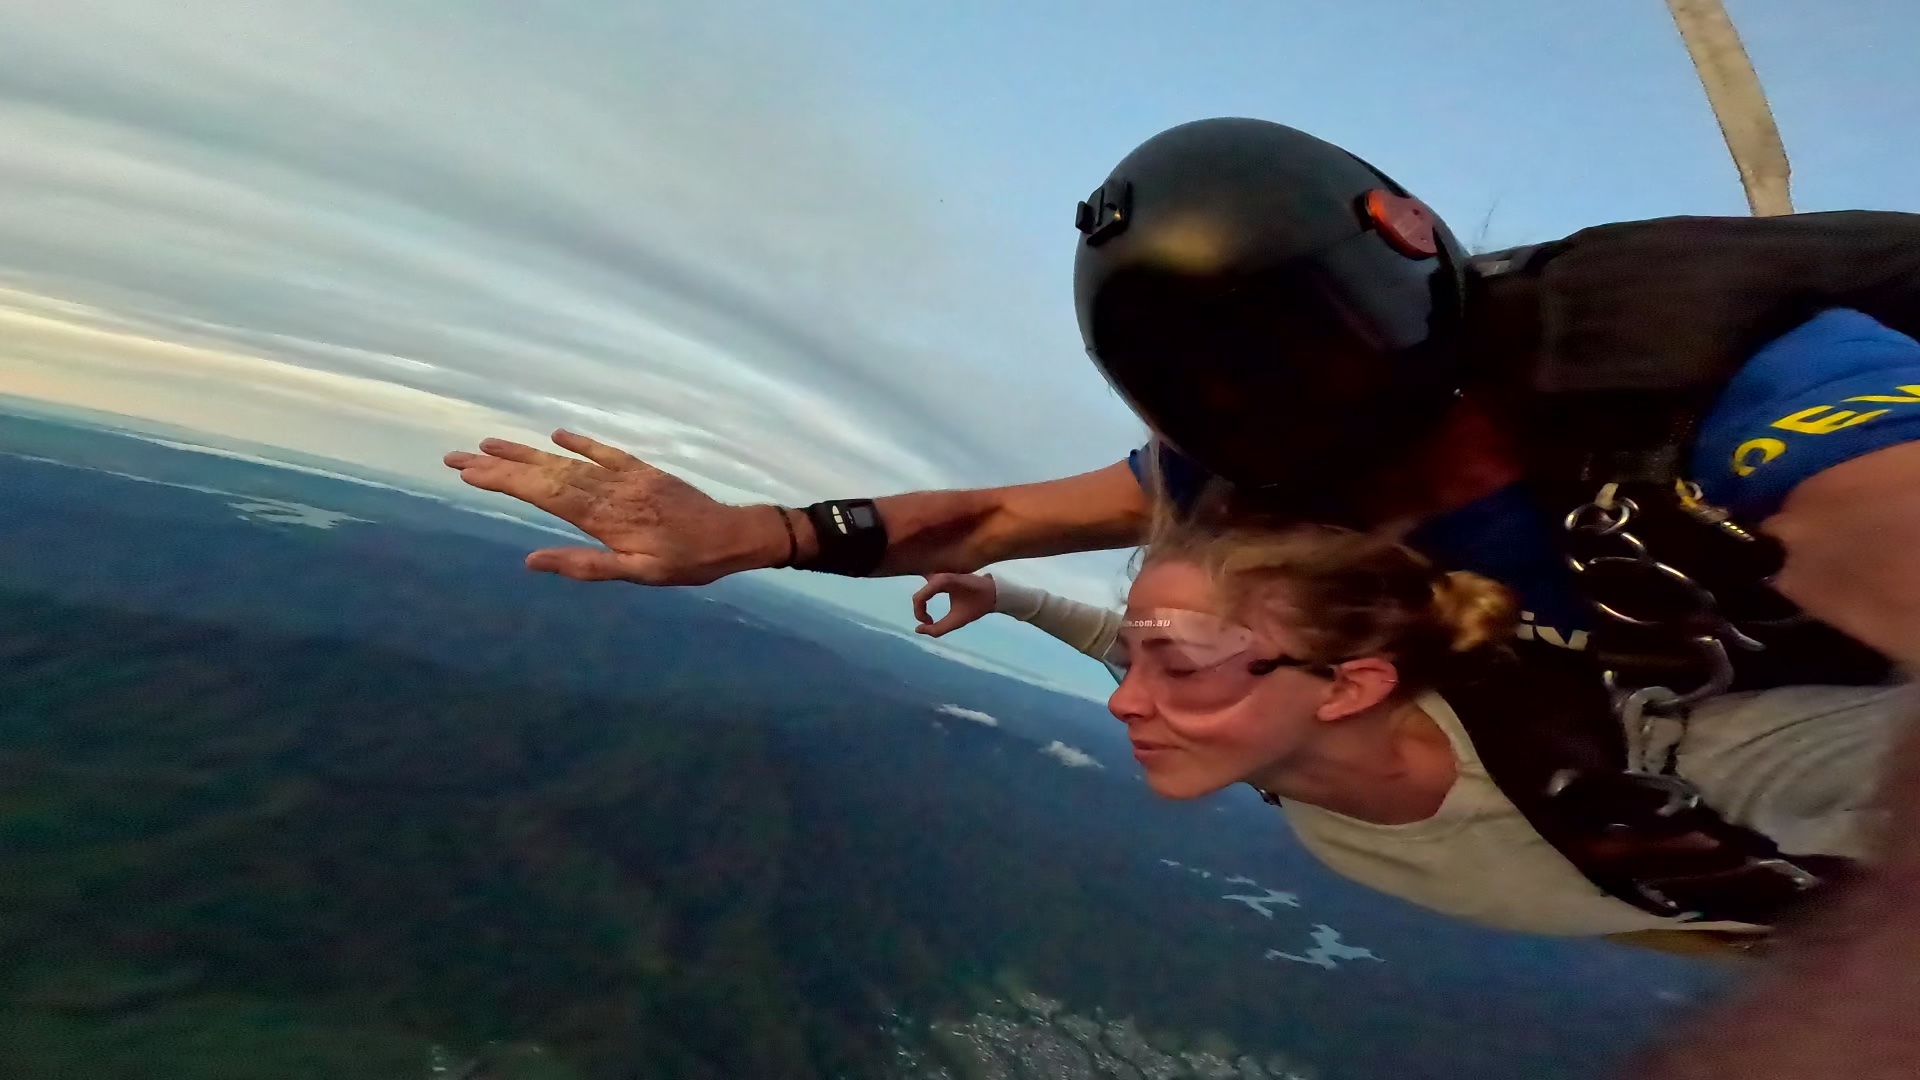 Sky Diving in Cairns on my 21st Birthday